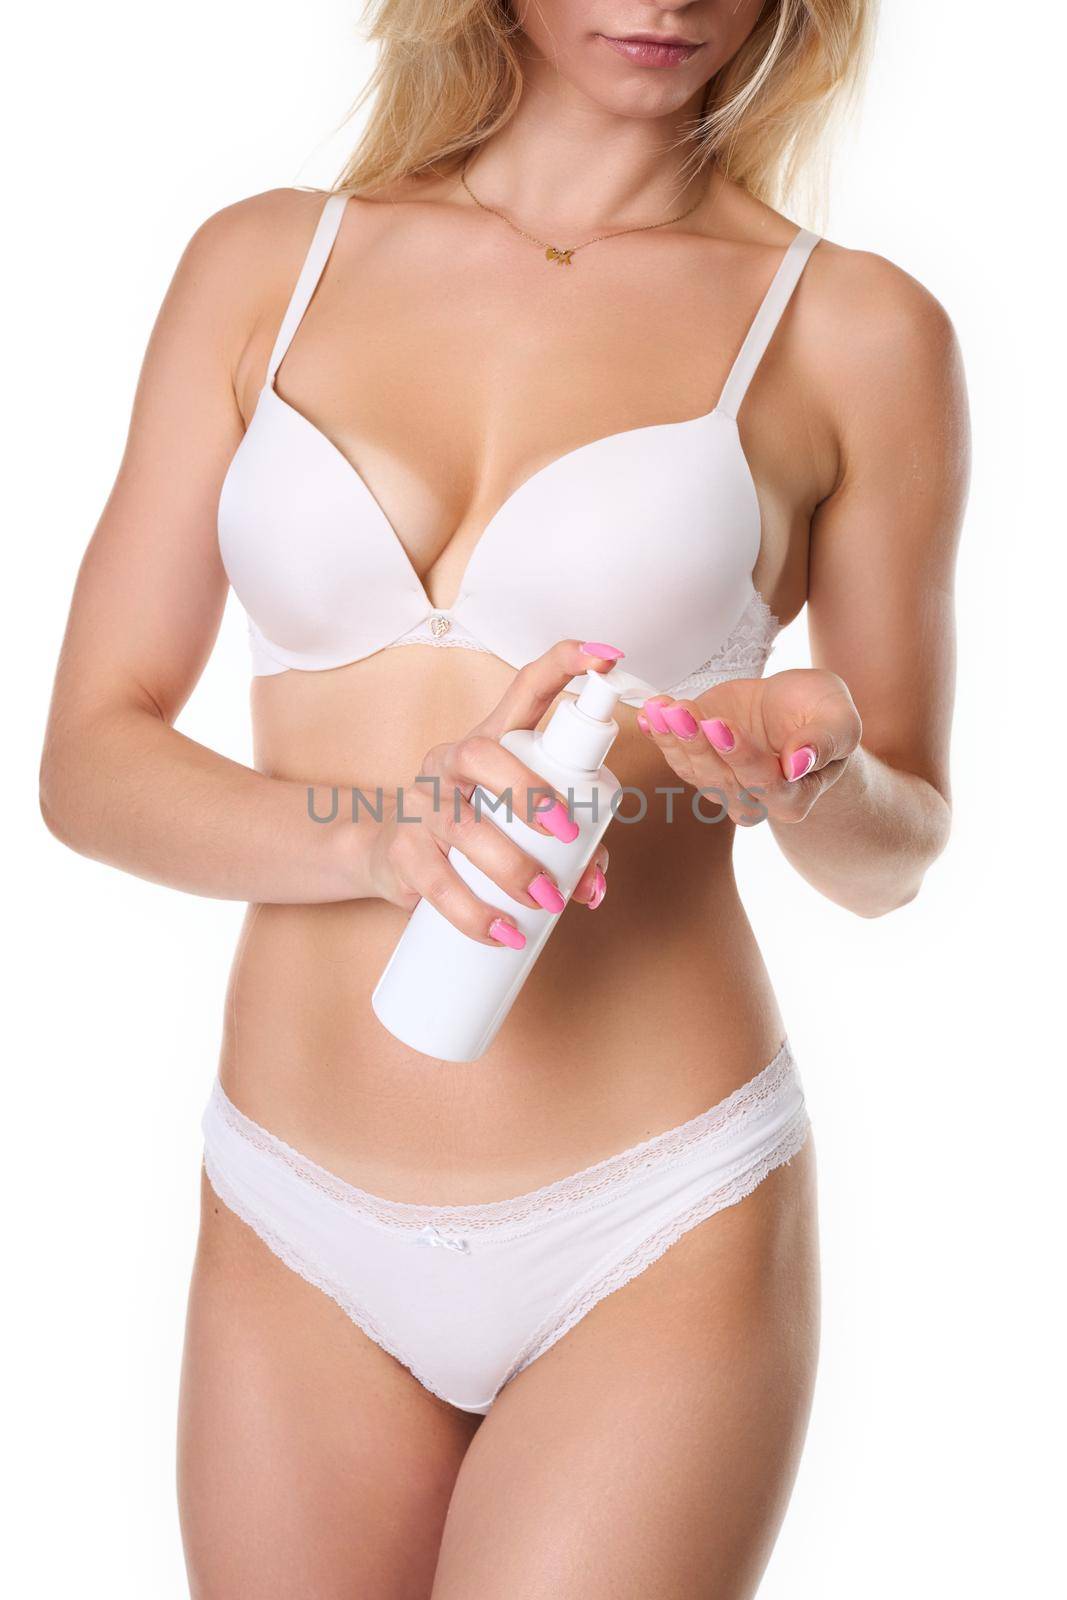 blonde haired woman uses body lotion. studio photography on a white background by Jarosz